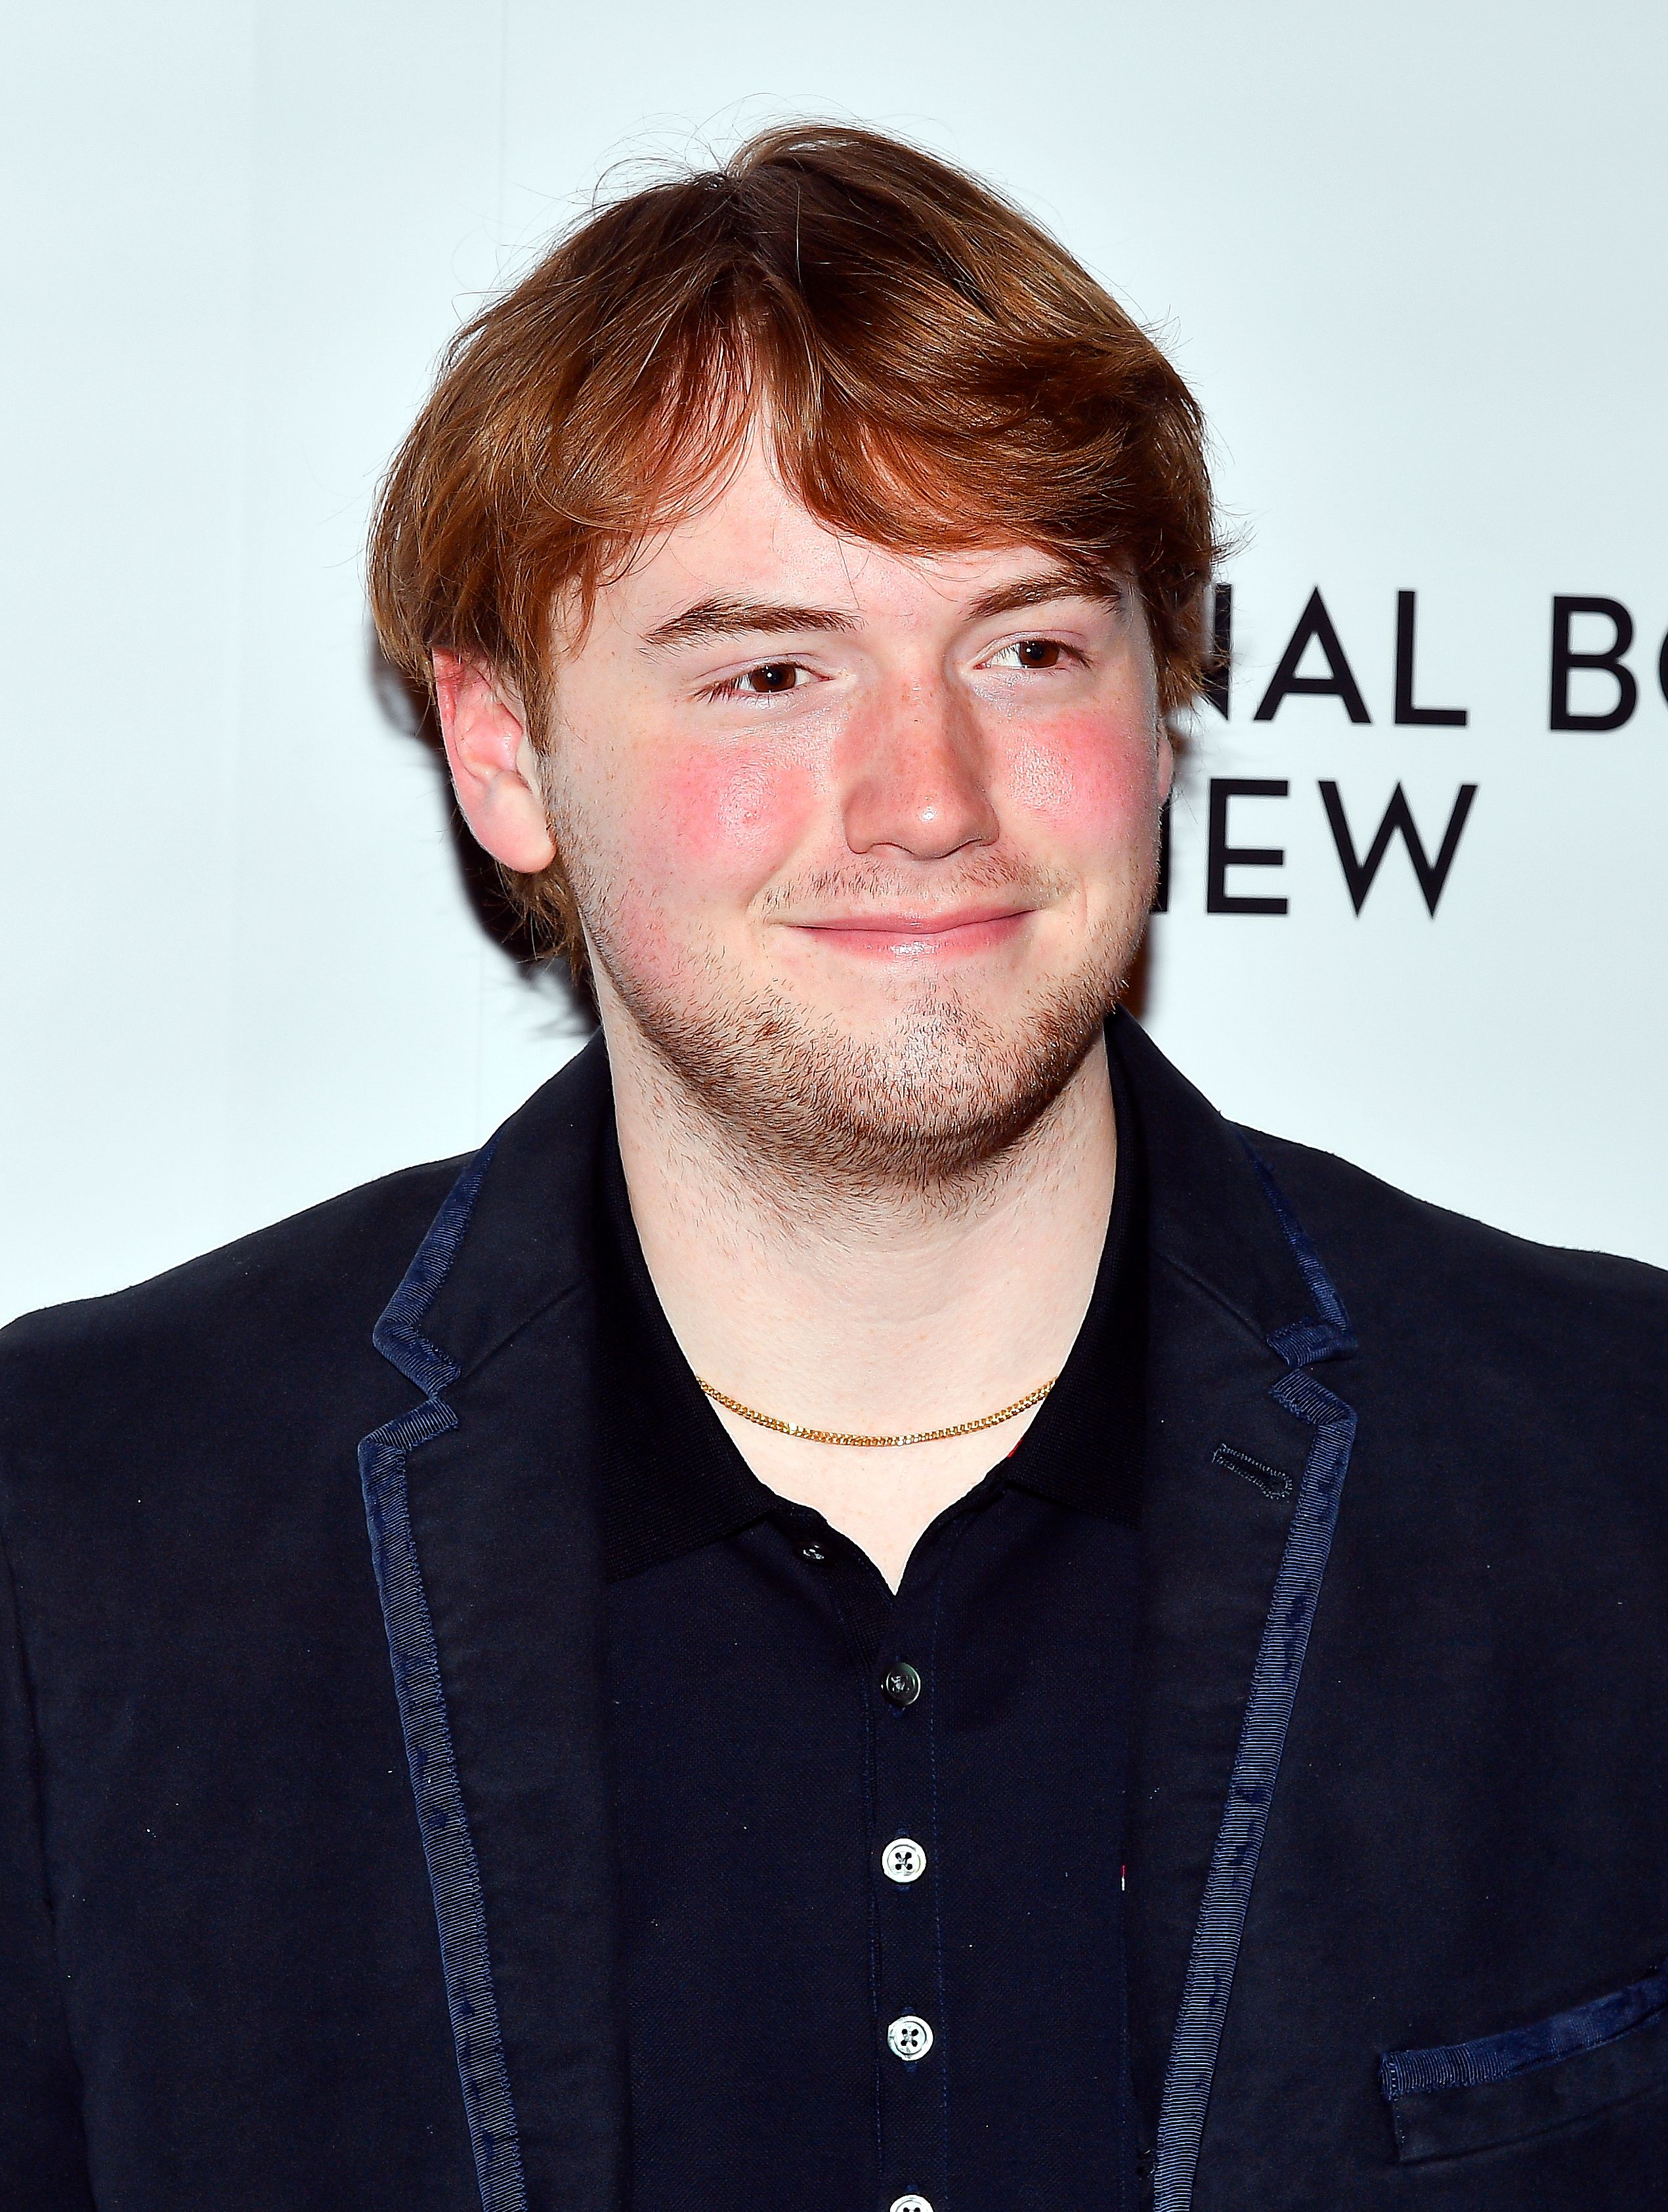 <p>Philip Seymour Hoffman and Mimi O'Donnell's eldest child, Cooper Hoffman (who was born in 2003), made his acting debut in the 2021 movie "Licorice Pizza," which was directed by filmmaker Paul Thomas Anderson, who made five movies with Philip before the actor's 2014 death. Cooper is seen here at the <span>National Board of Review Gala on March 15, 2022.</span></p>